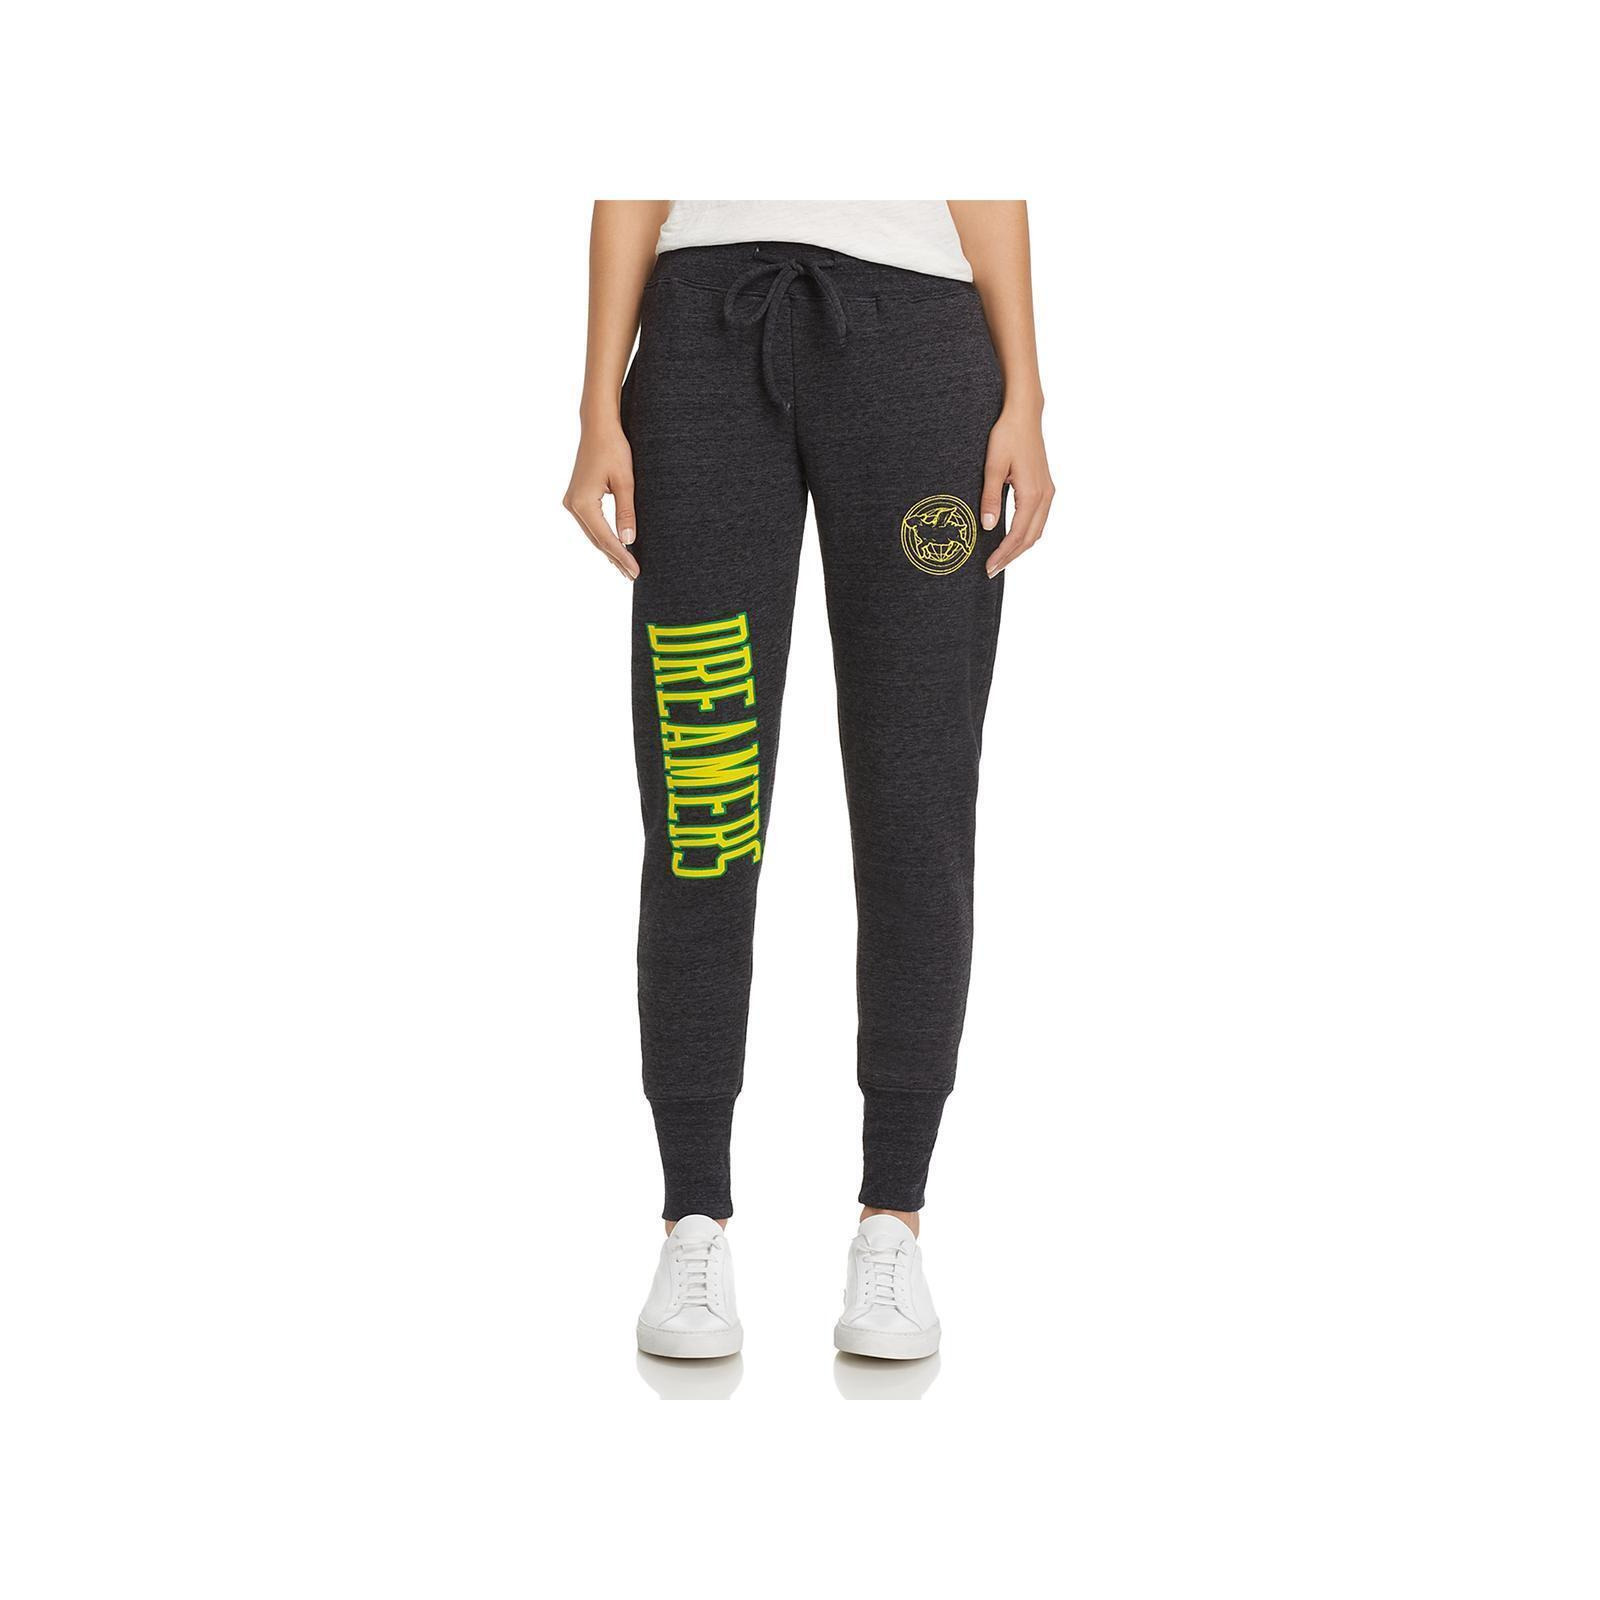 University of Today, Dreamers of Tomorrow Womens Logo Comfy Jogger Pants